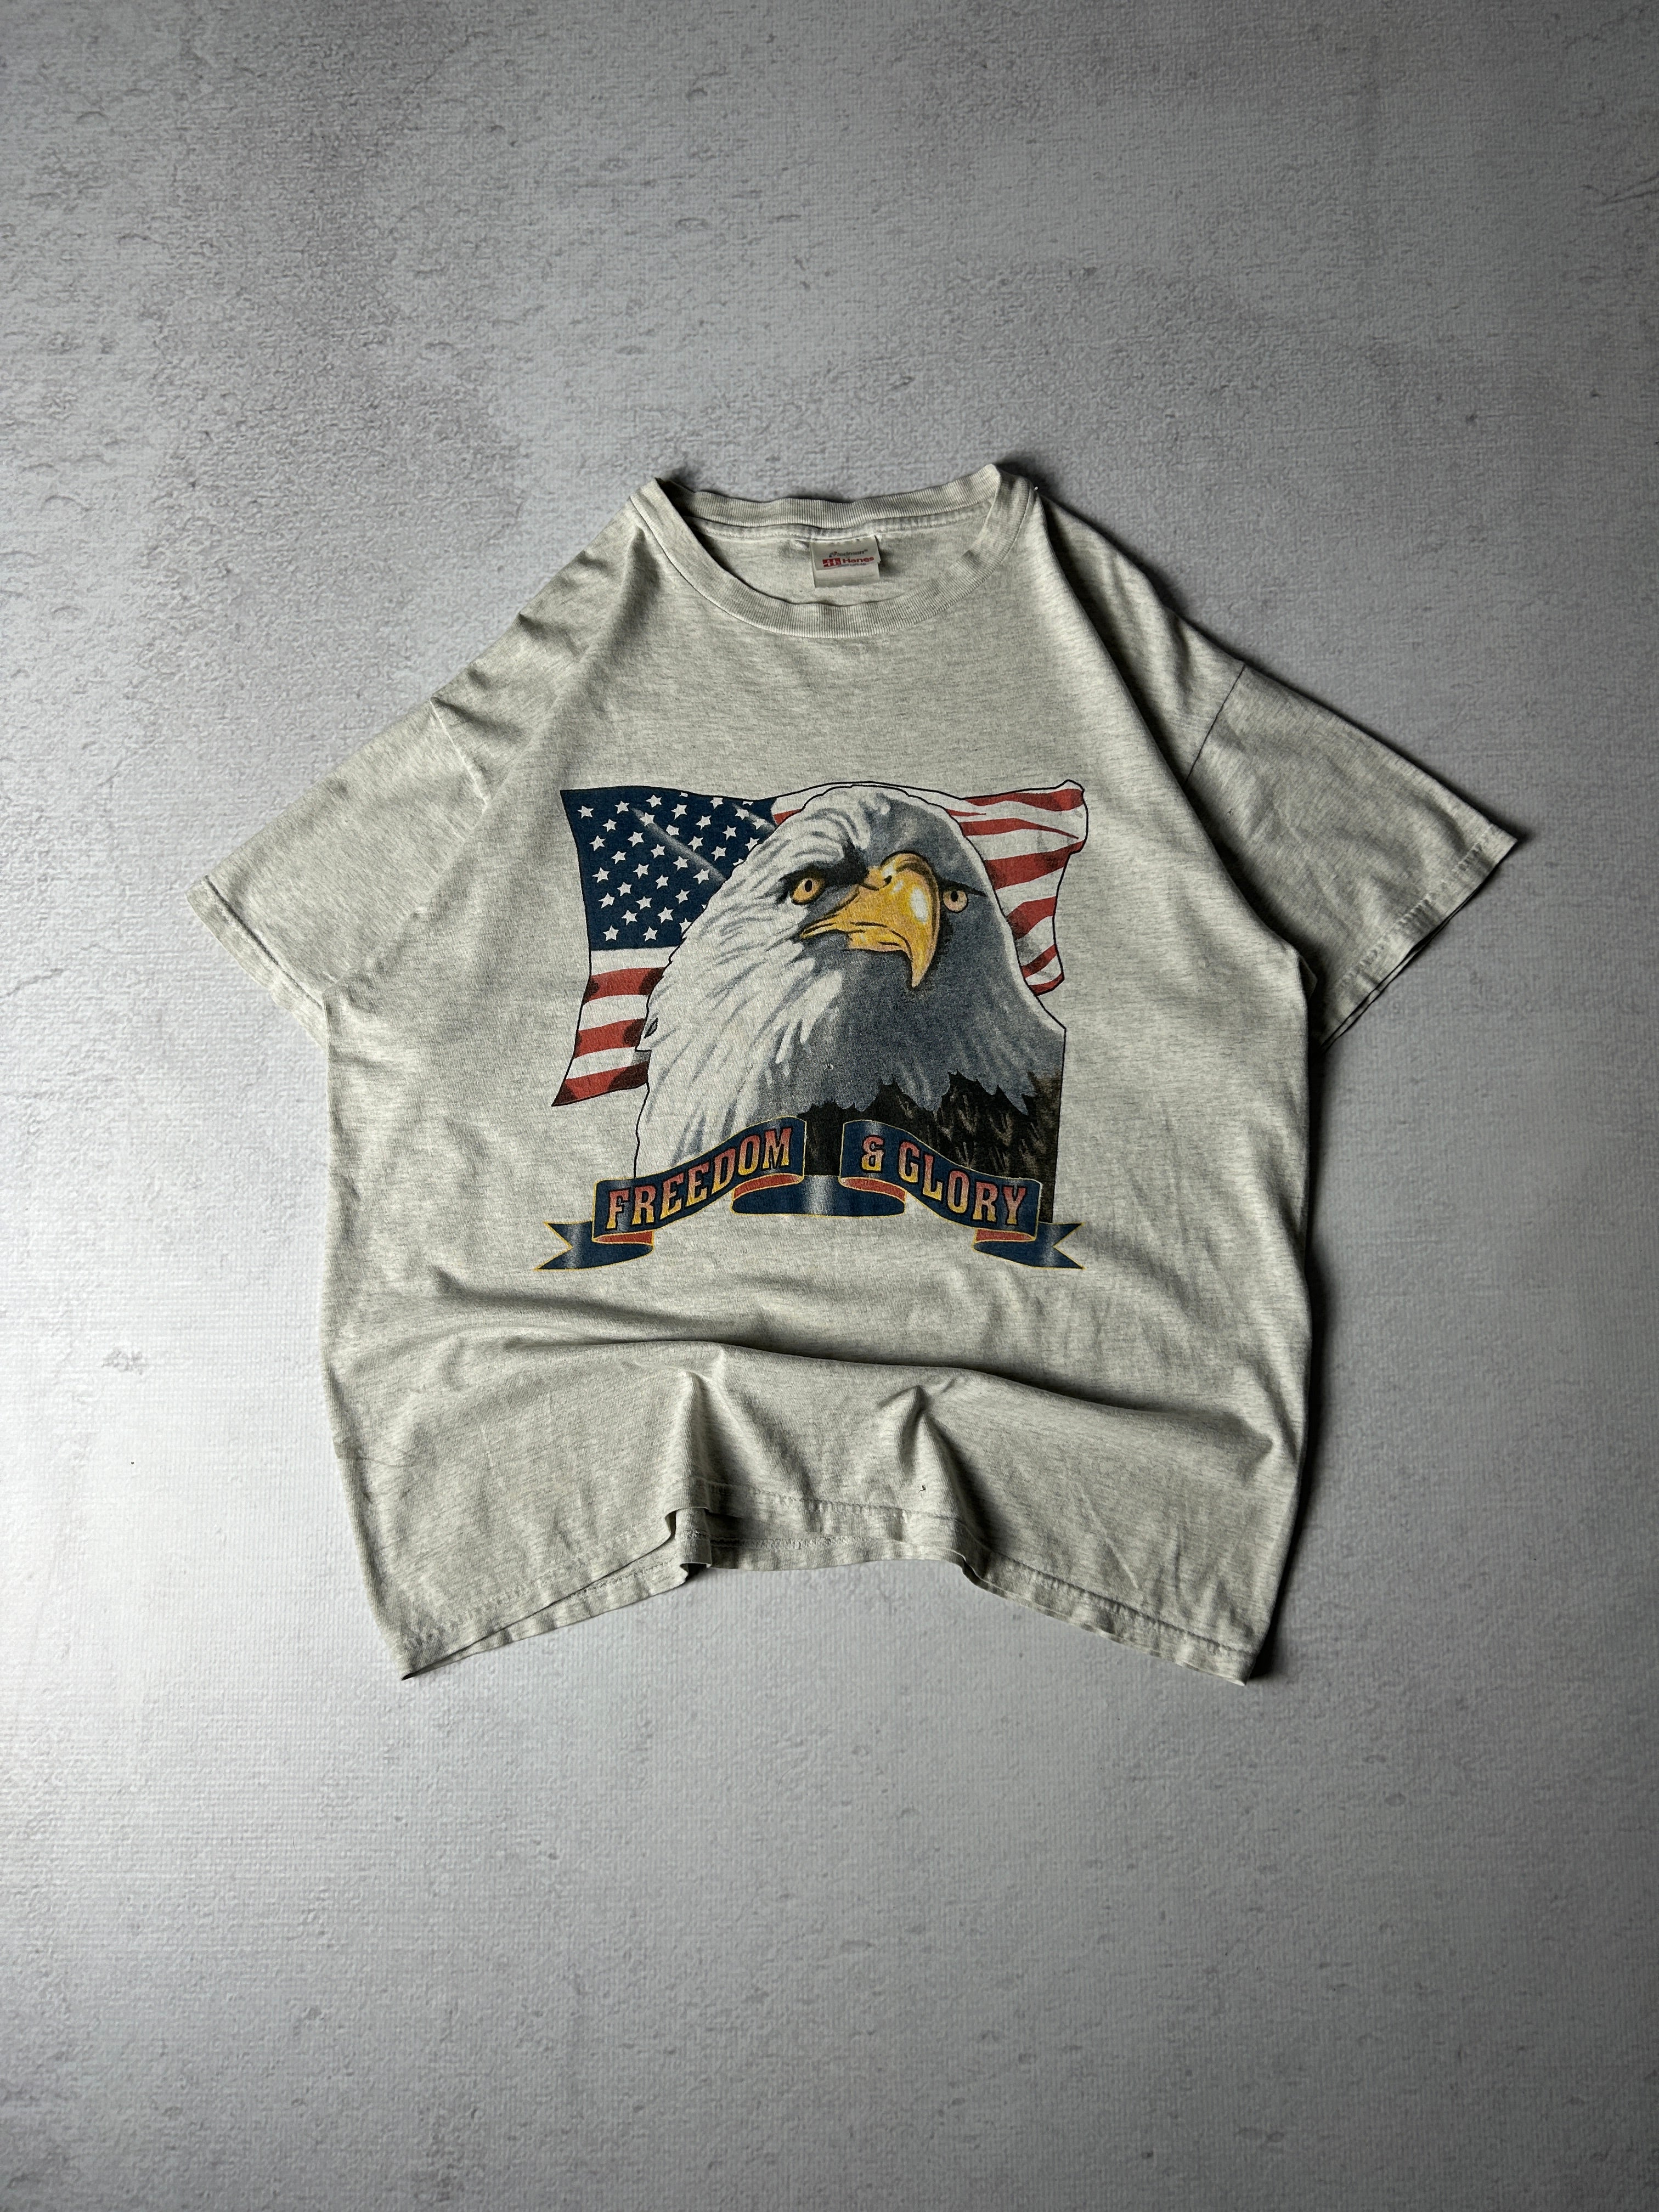 Vintage 90s "Freedom & Glory" Graphic T-Shirt - Men's Large